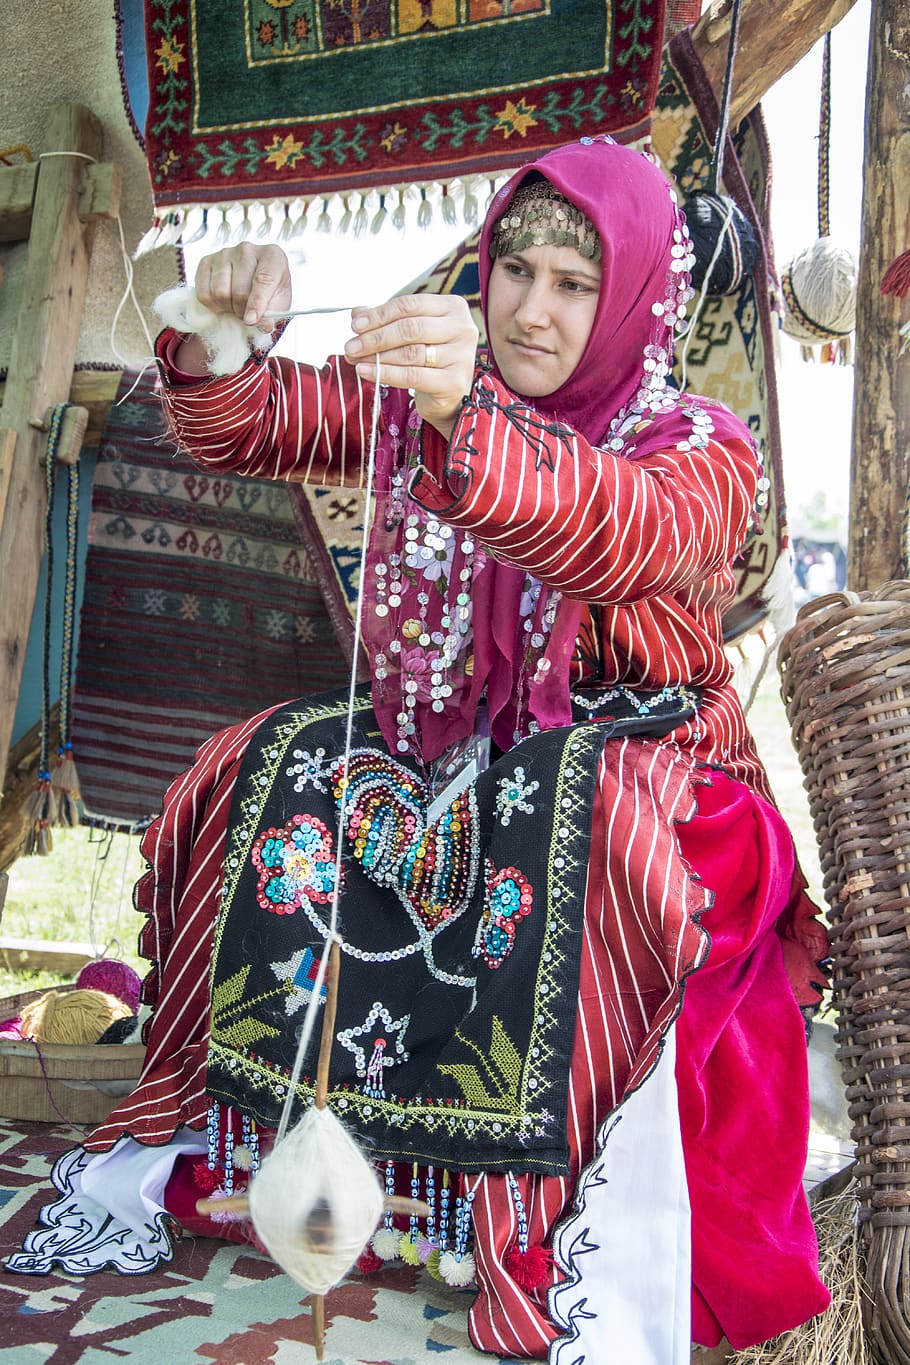 nomad, culture, local, turkey, old, ottoman, nomads market